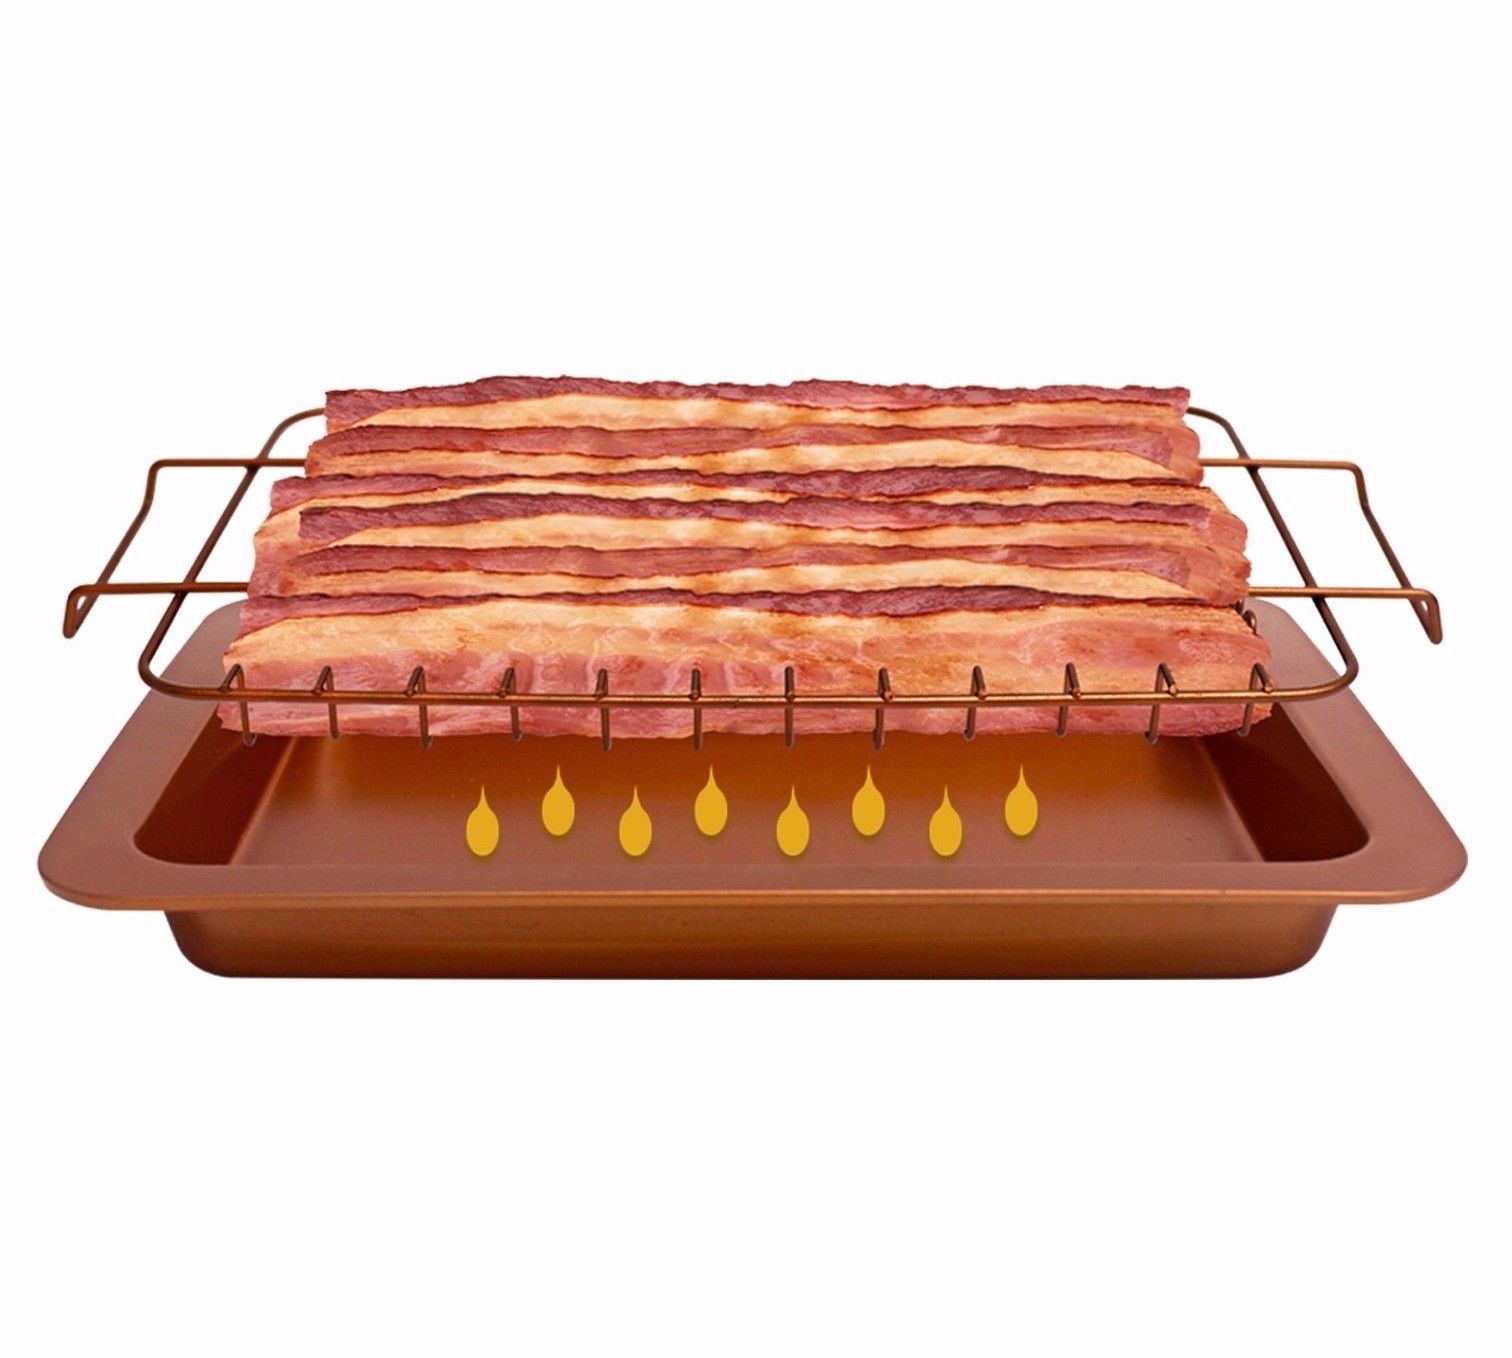 Gotham Steel Bacon Bonanza, 12 Slice Nonstick Copper 2-Piece Set, Includes Bacon Cooker and Drip Tray, As Seen on TV